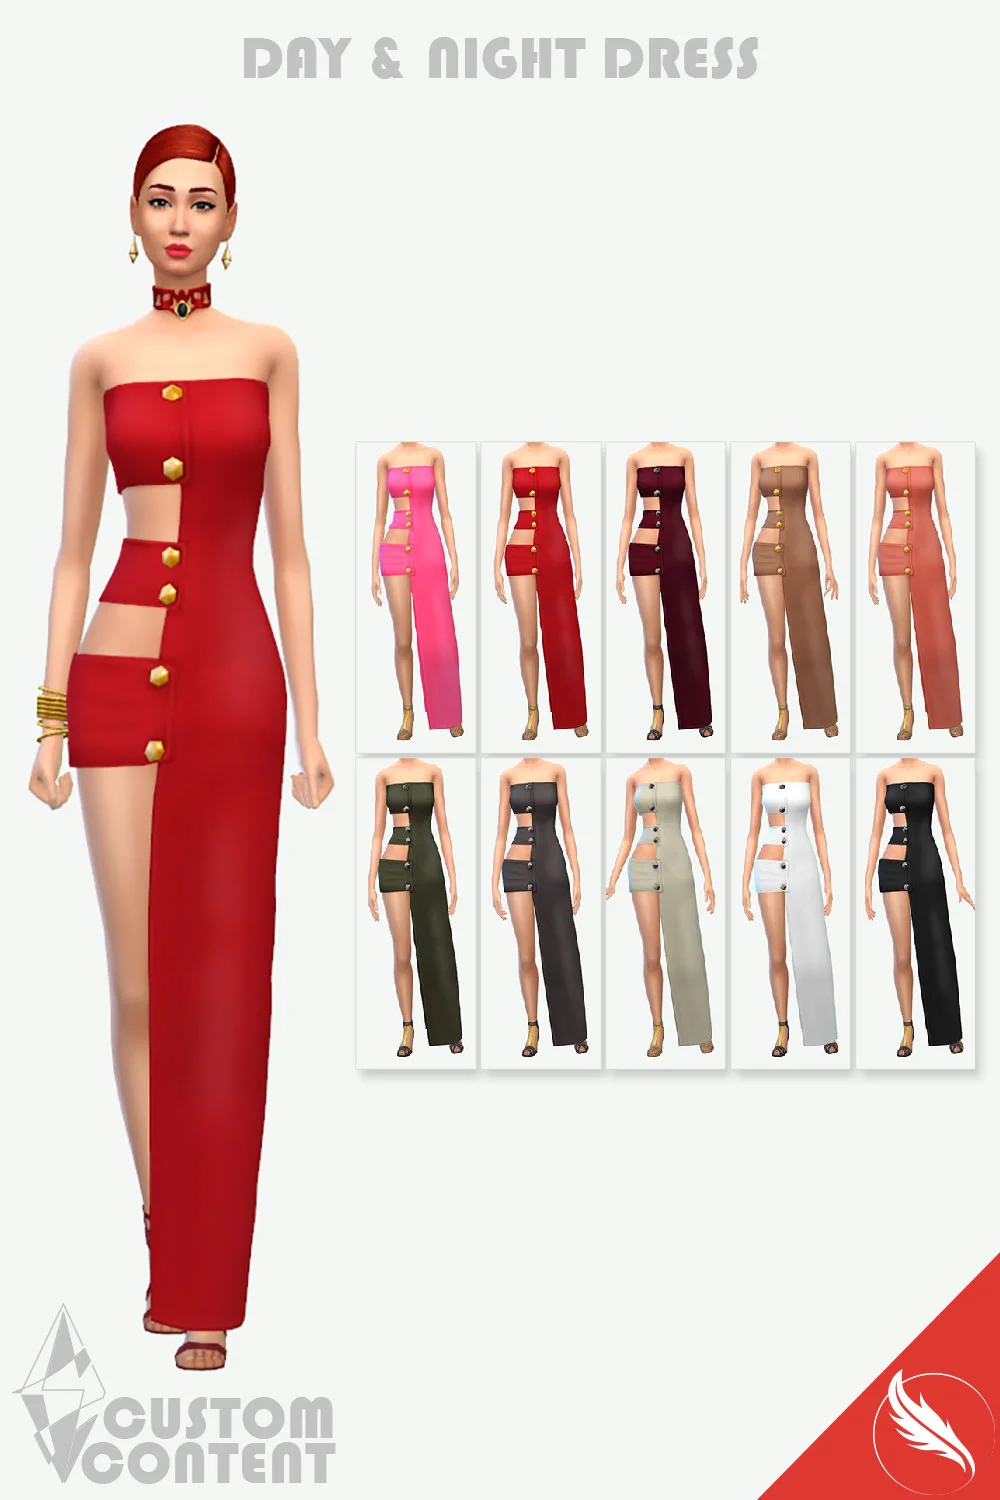 The Sims 4 Dress